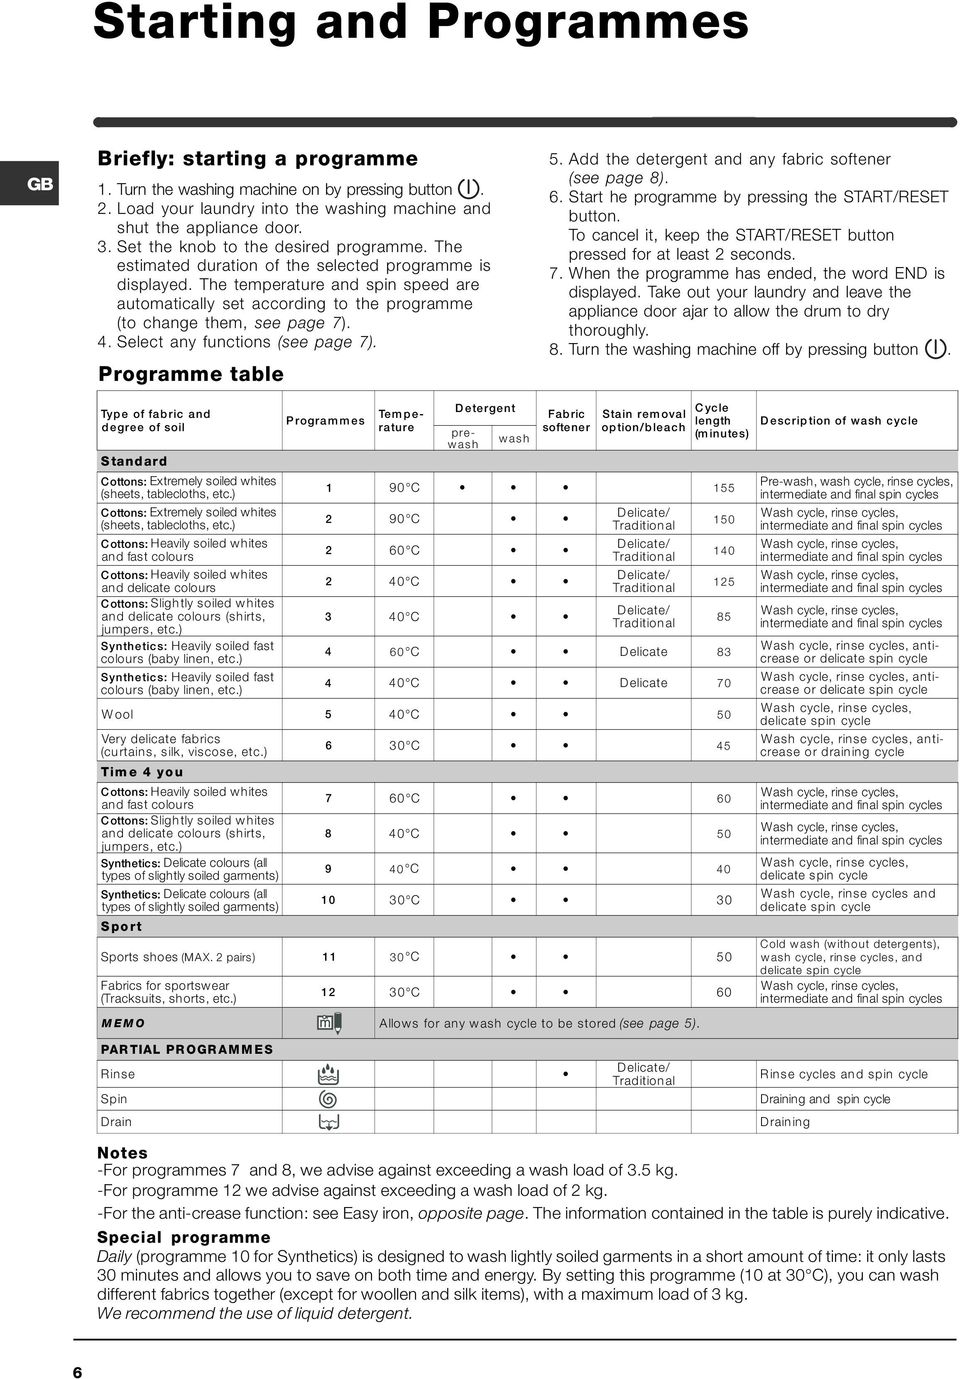 The temperature and spin speed are automatically set according to the programme (to change them, see page 7). 4. Select any functions (see page 7). Programme table 5.